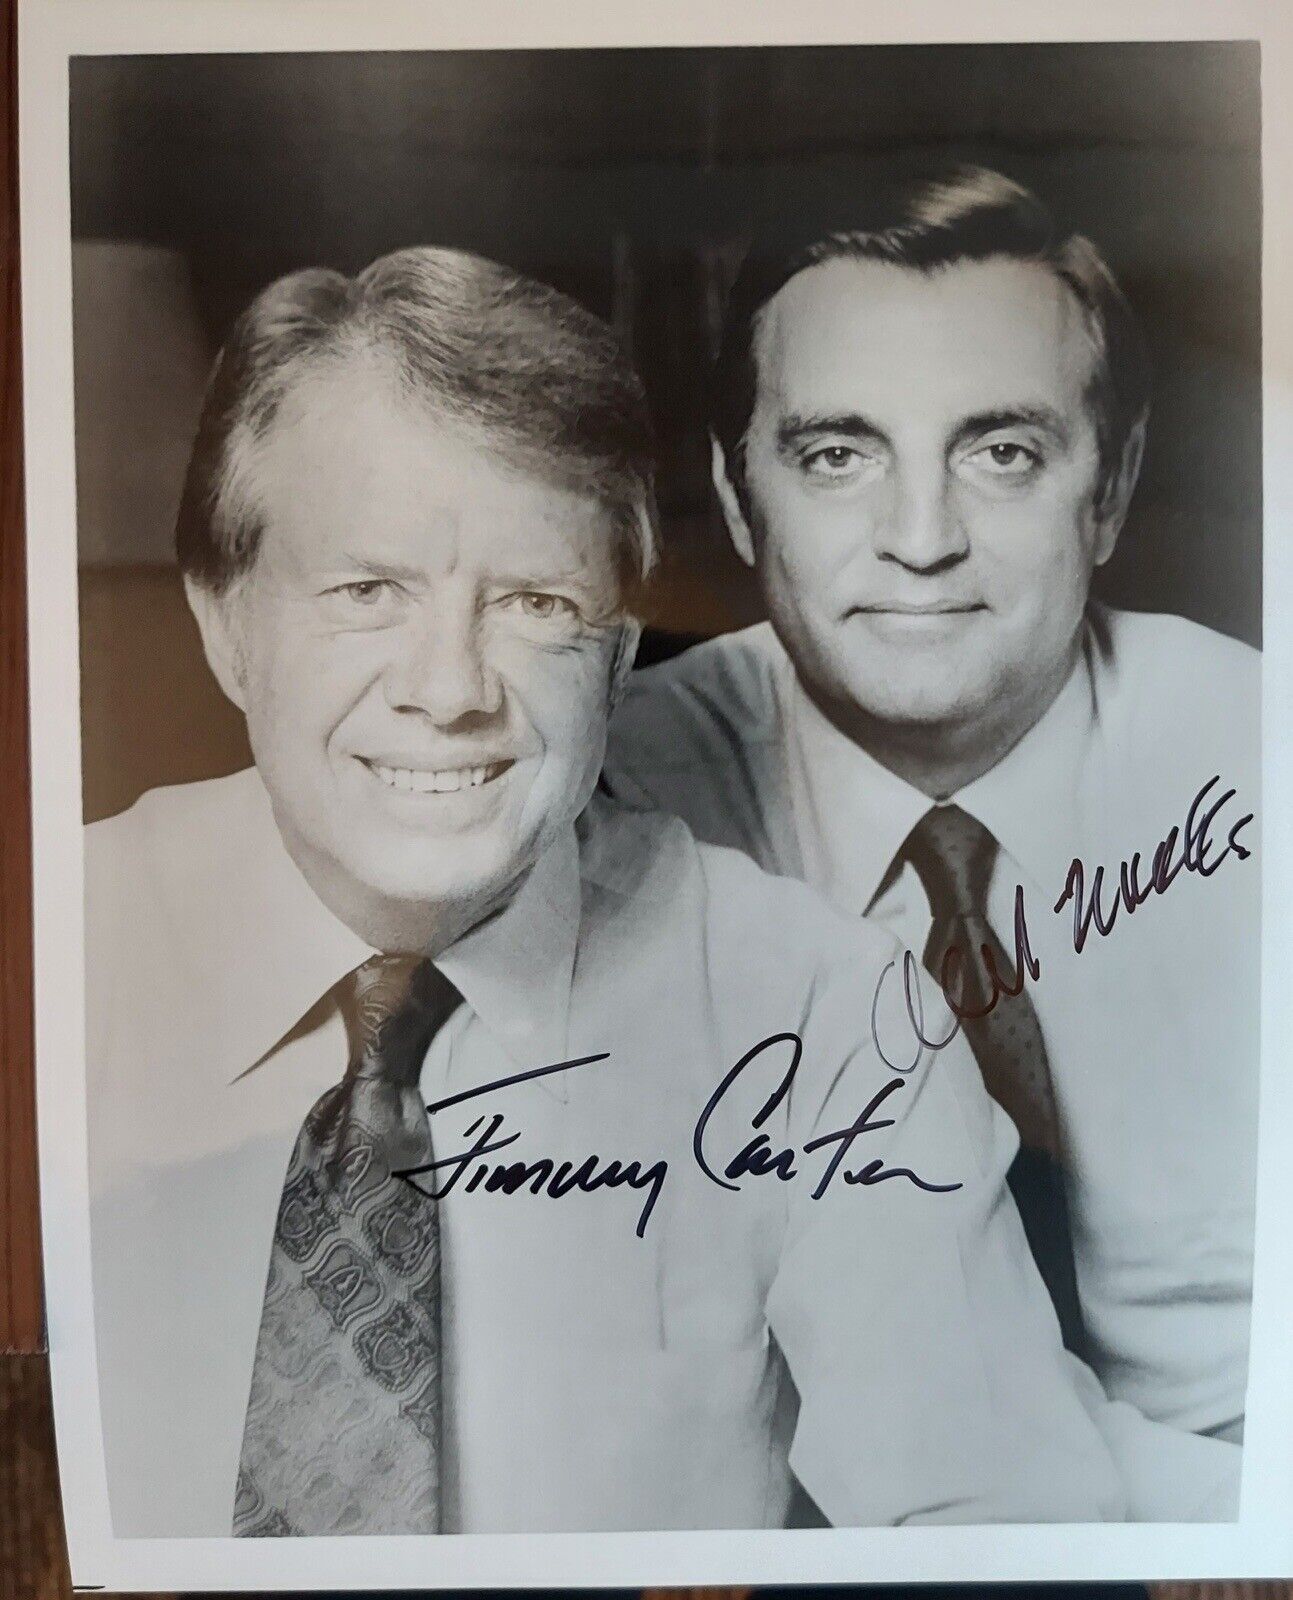 Jimmy Carter & Walter Mondale Signed B&W 8x10 Photo Autographed Full Signature